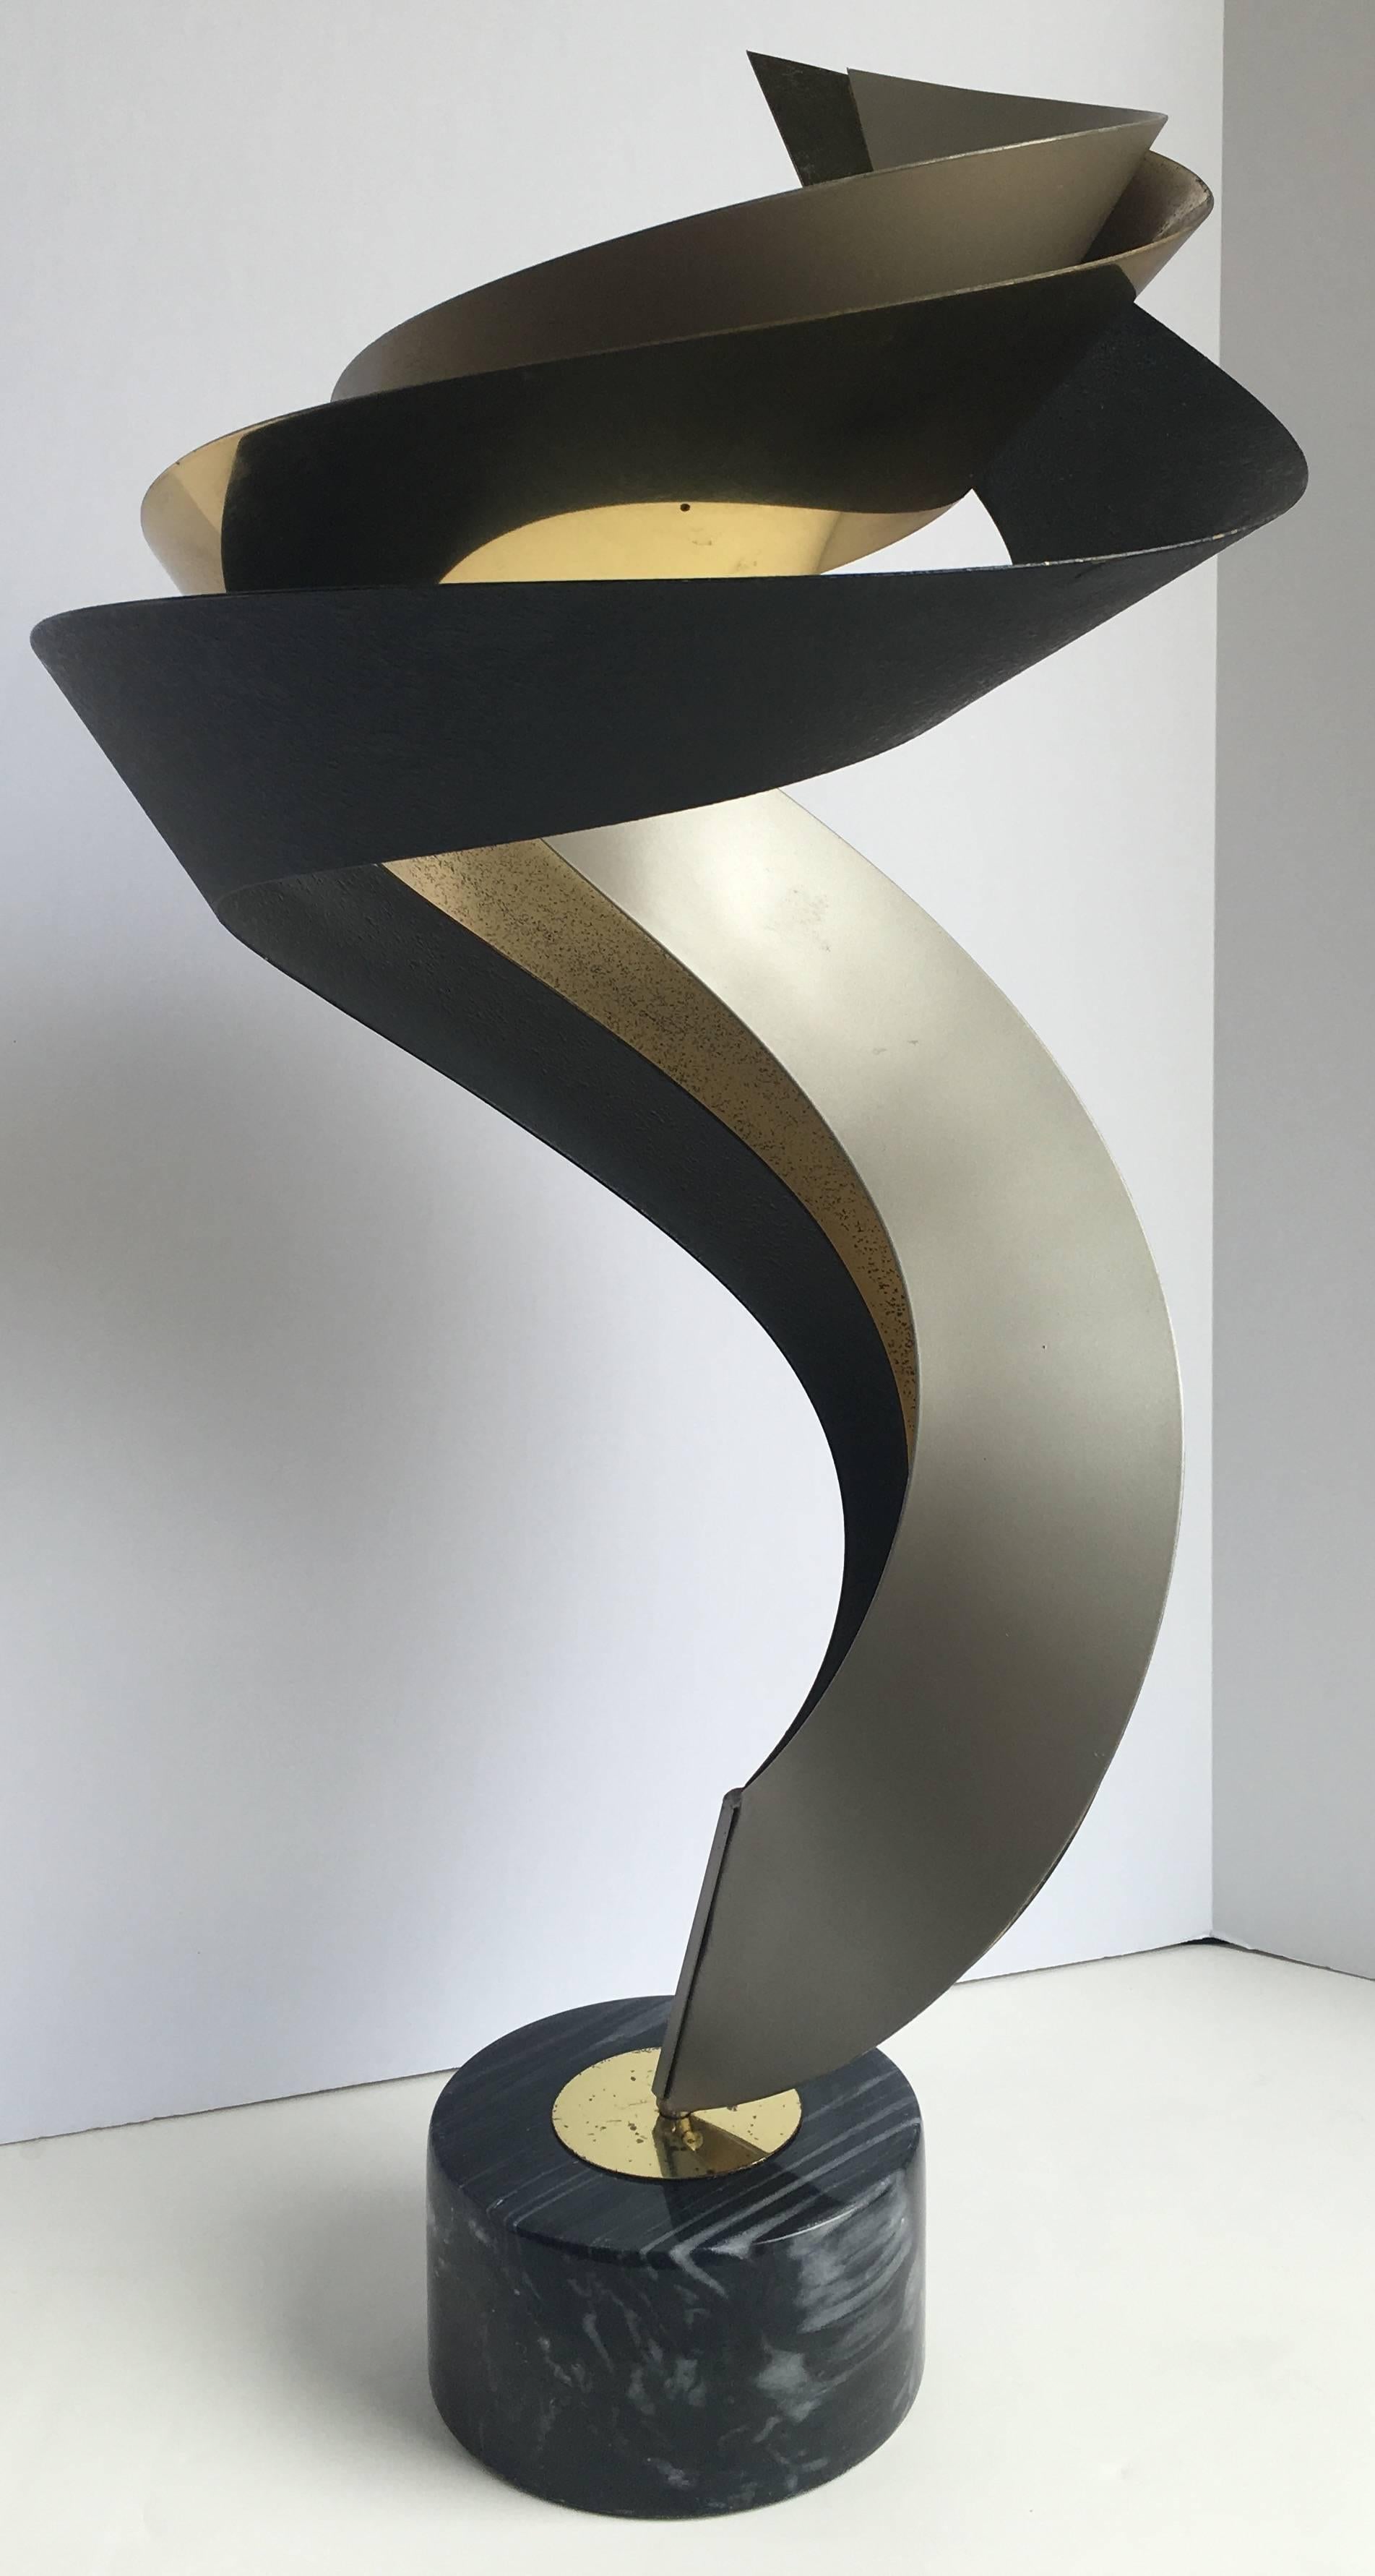 Mixed metal modern table sculpture by Curtis Jere featuring brass, black and matte silver. Polished marble base. No signature.
